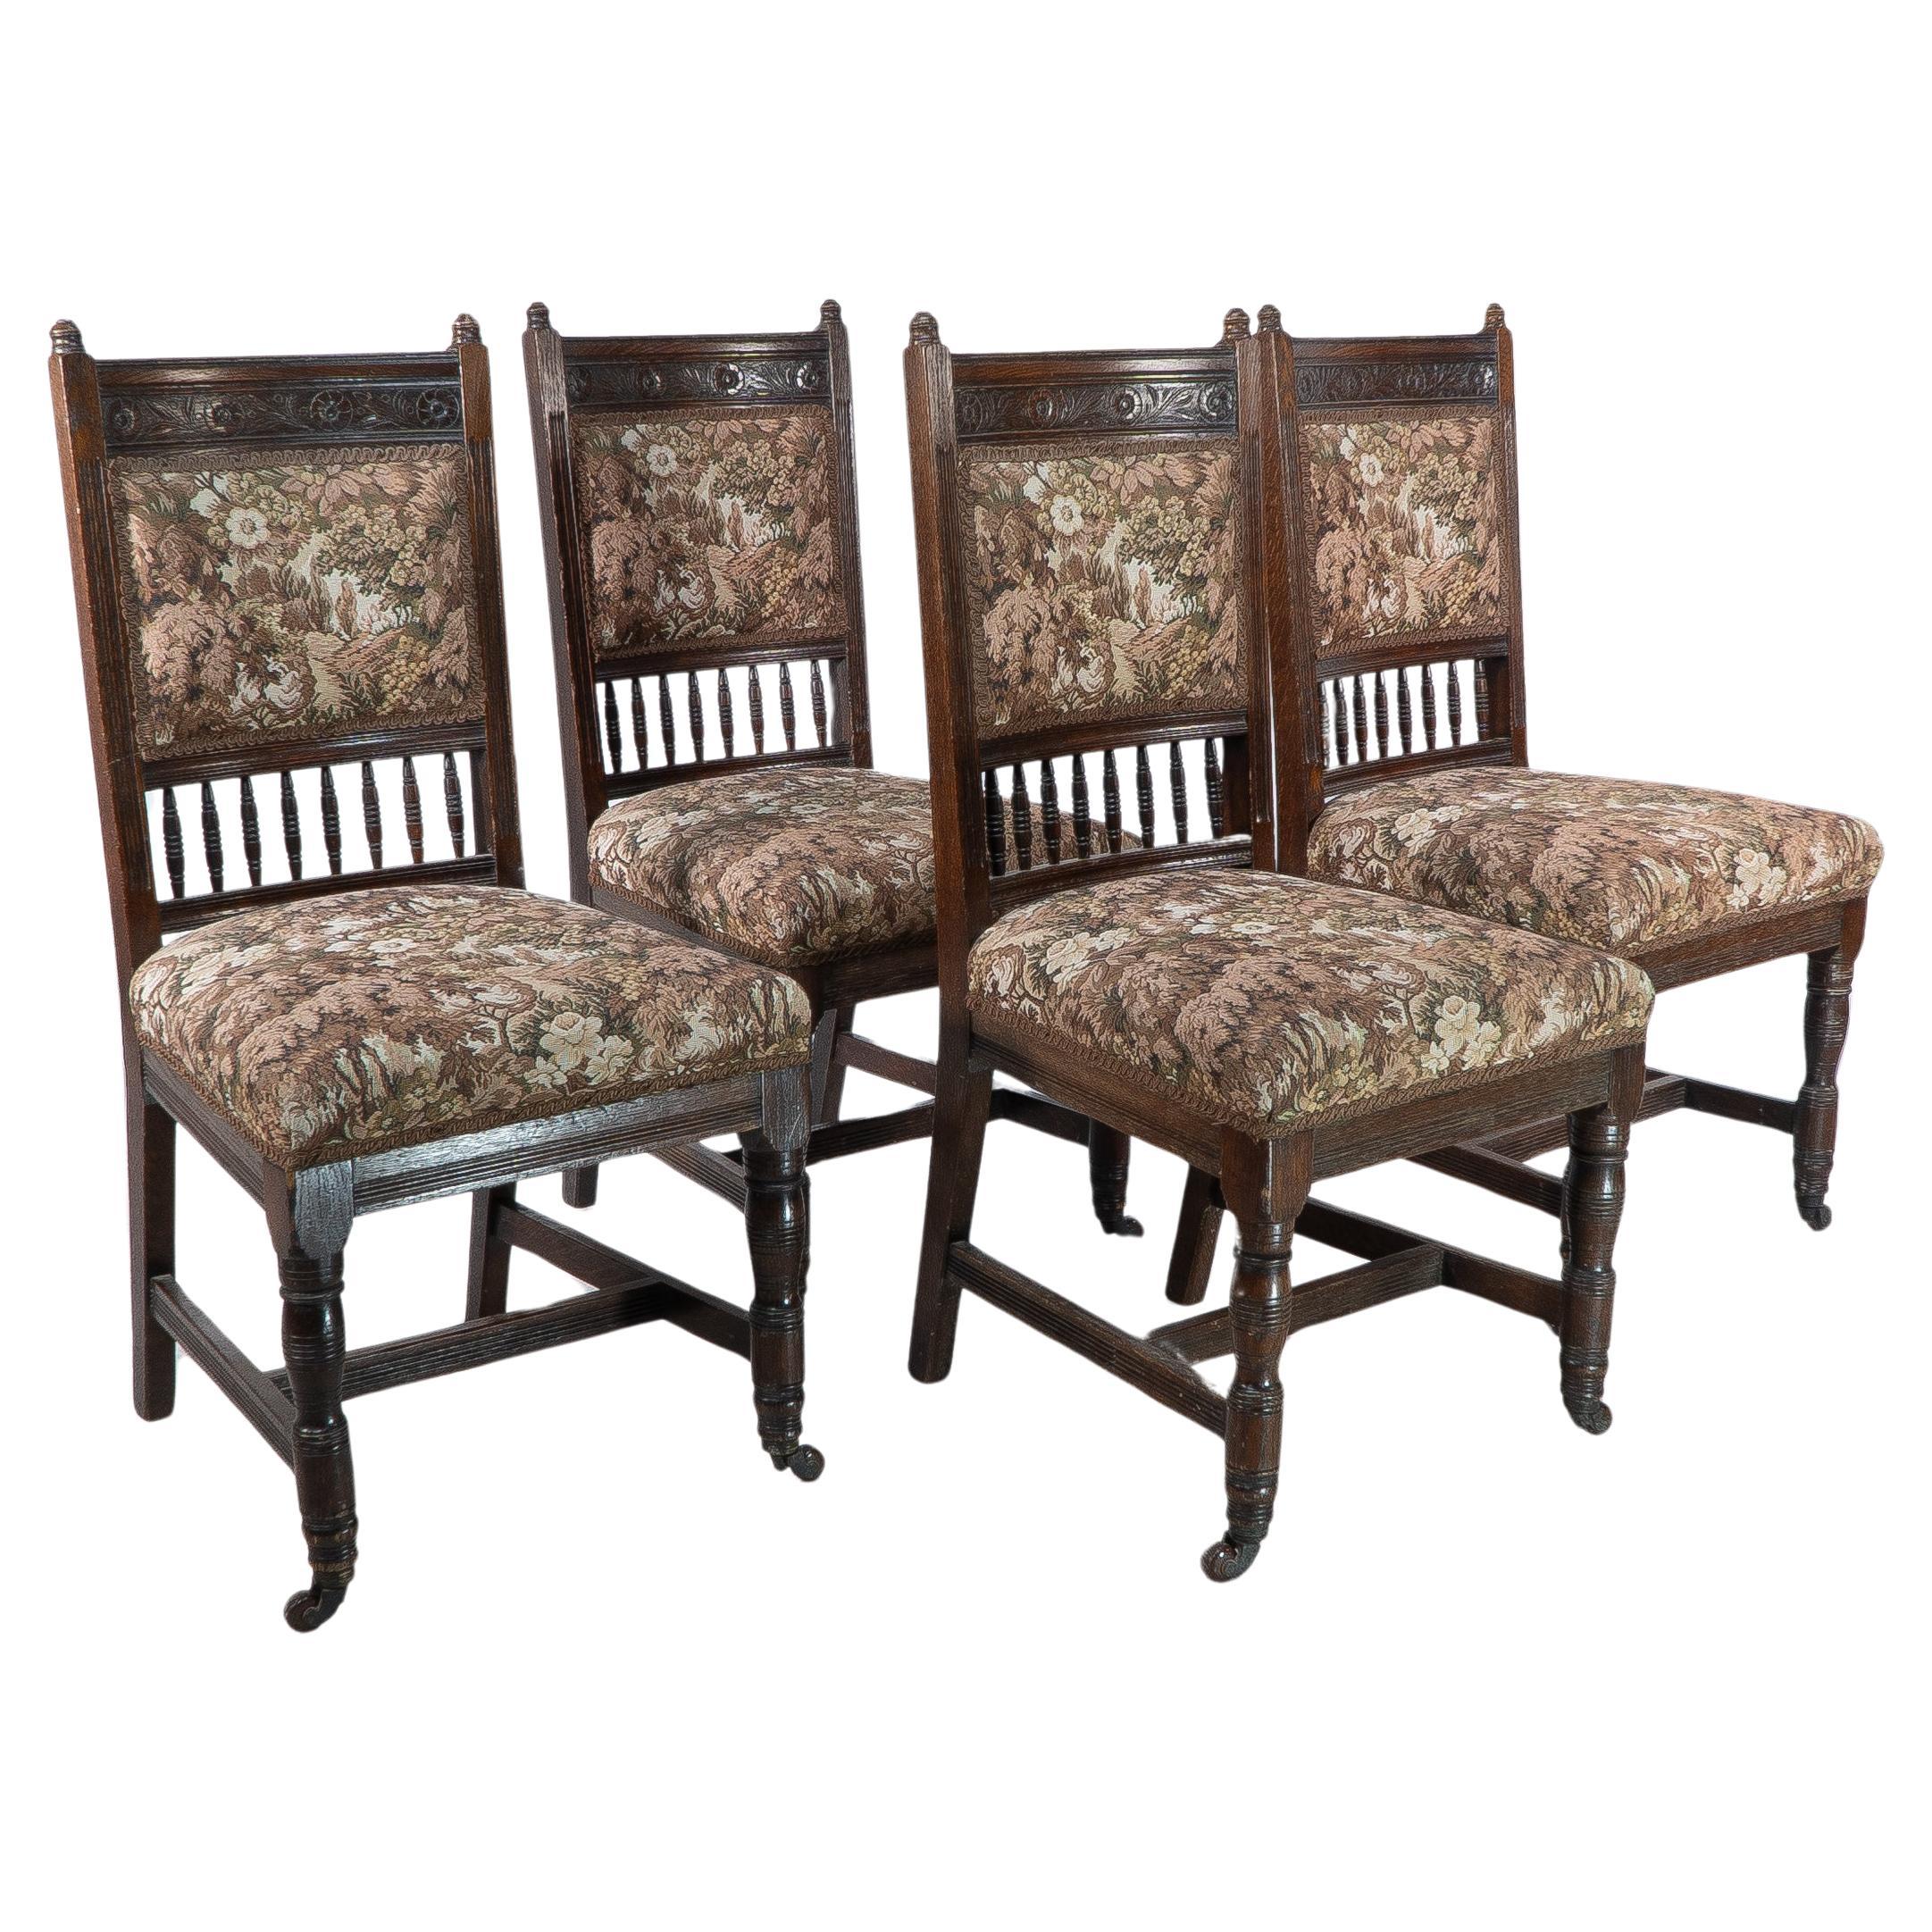 E W Godwin attributed, A set of four Aesthetic Movement oak dining chairs